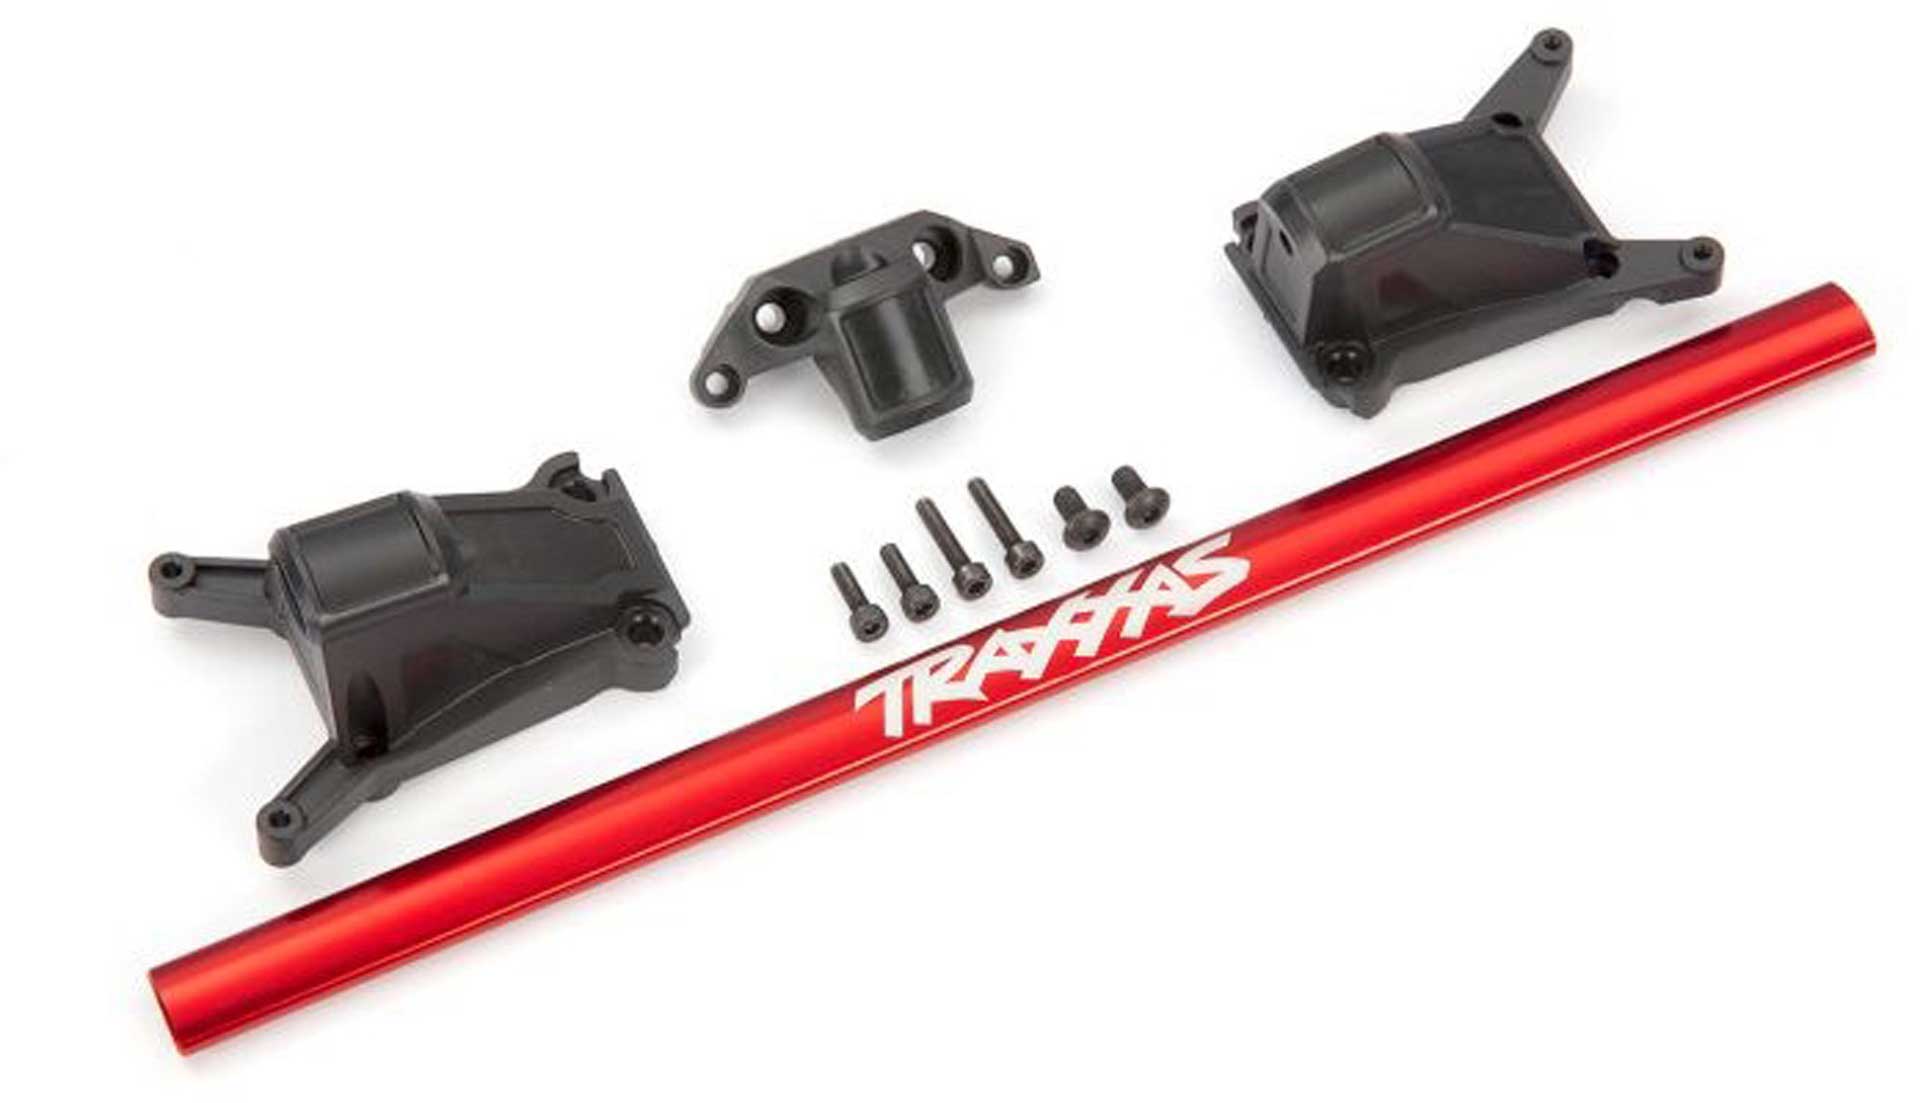 TRAXXAS CHASSIS BRACE KIT ROT FÜR LCG-CHASSIS RUSTLER 4X4 ODER STAMPEDE 4X4